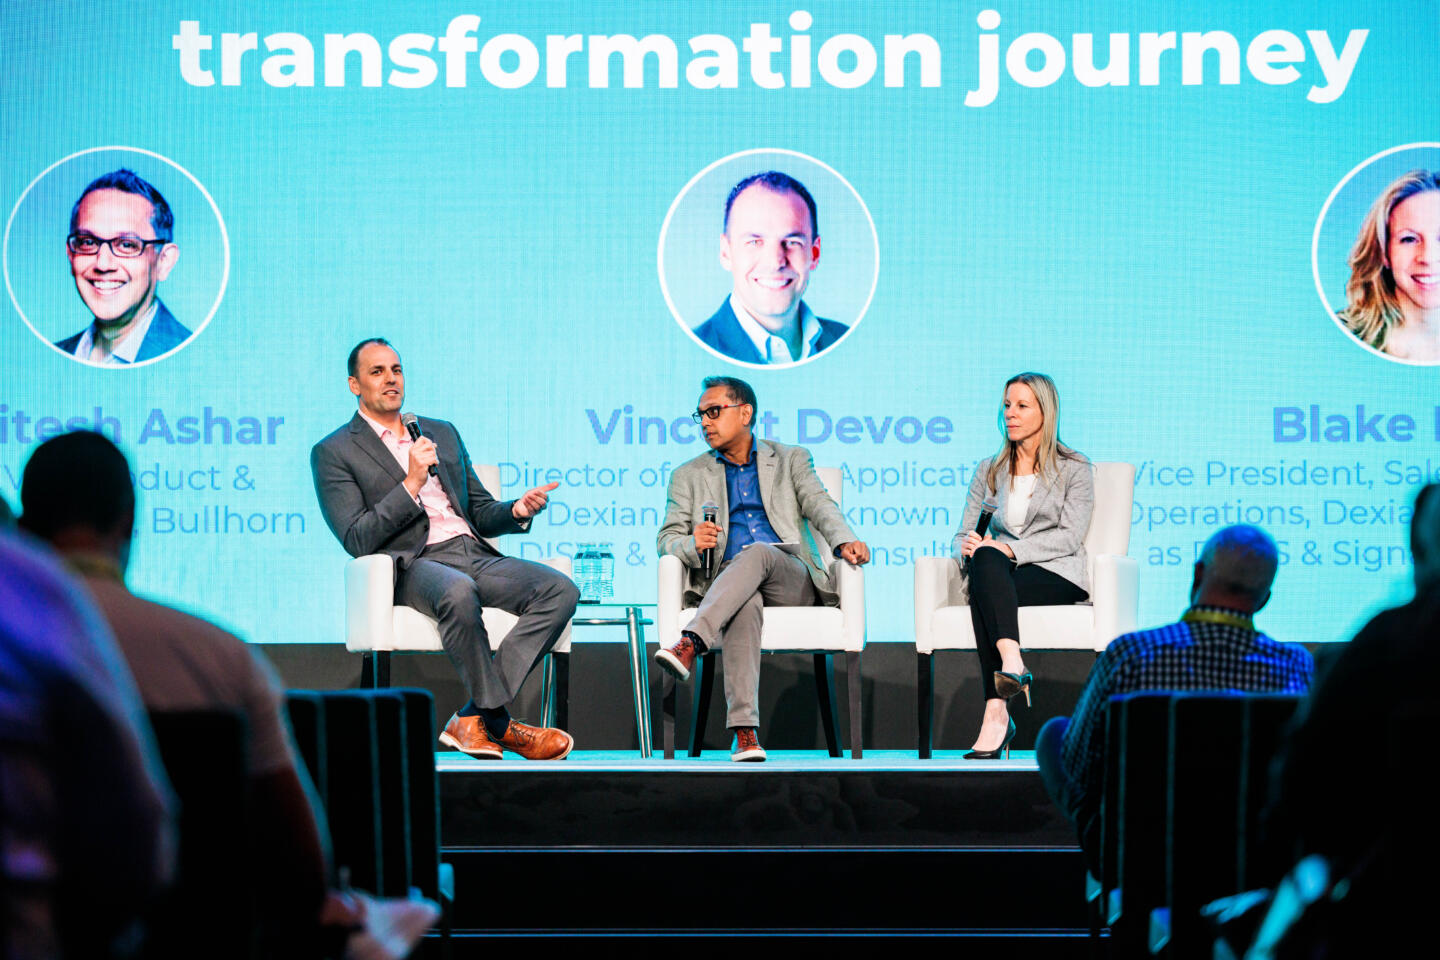 Successfully navigating the digital transformation journey with Mitesh Ashar from Bullhorn, and Blake Harris and Vinnie Devoe from Dexian.